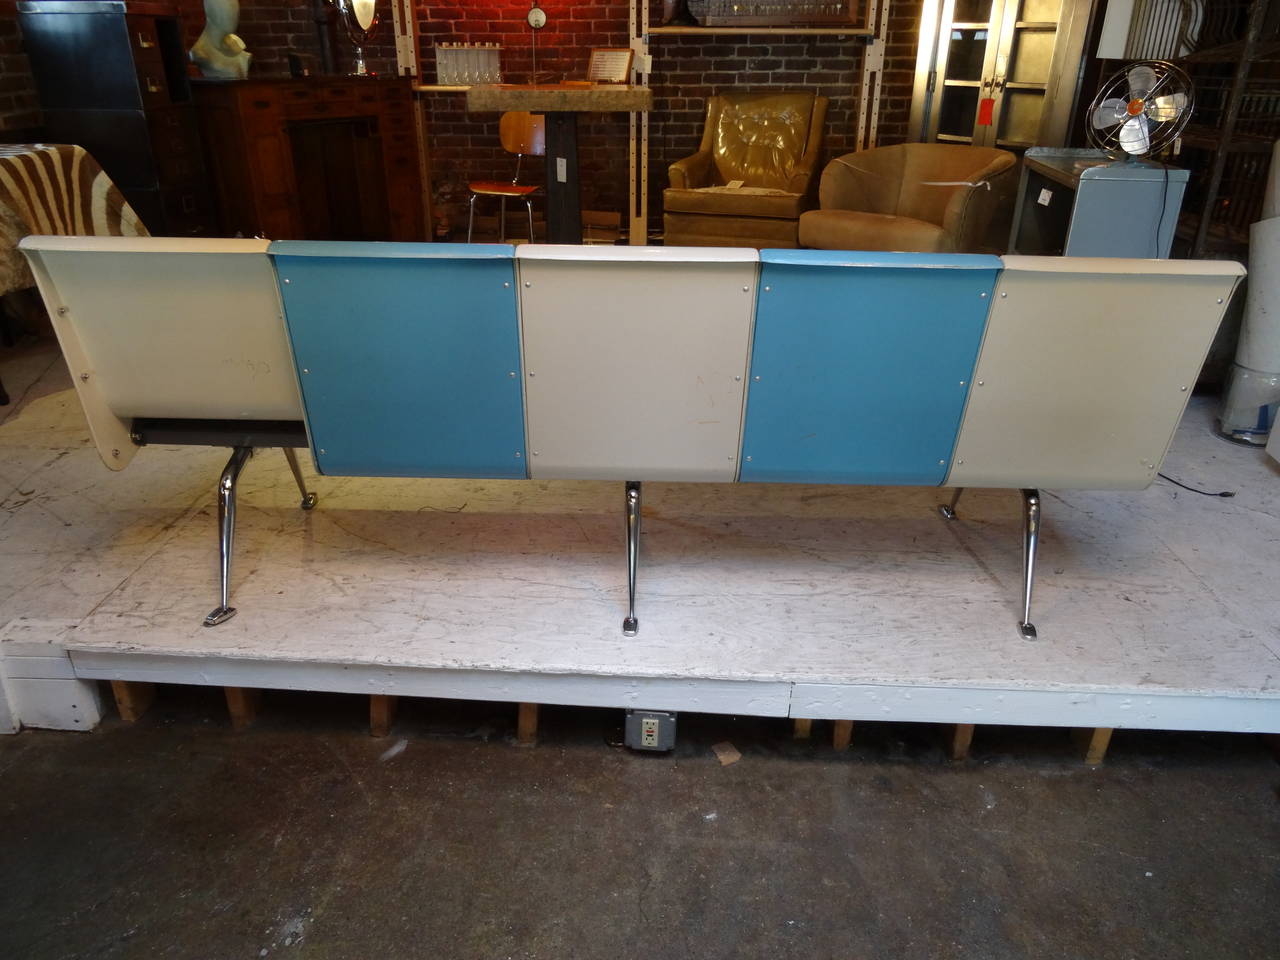 Five-seat, fiberglass, Brunswick Bowling Alley Bench.  Alternates blue and cream in color.  Fantastic!  Looks as if at one time it was attached to another.  Missing one back panel as shown in image 3.  Mid century homes are screaming for this piece